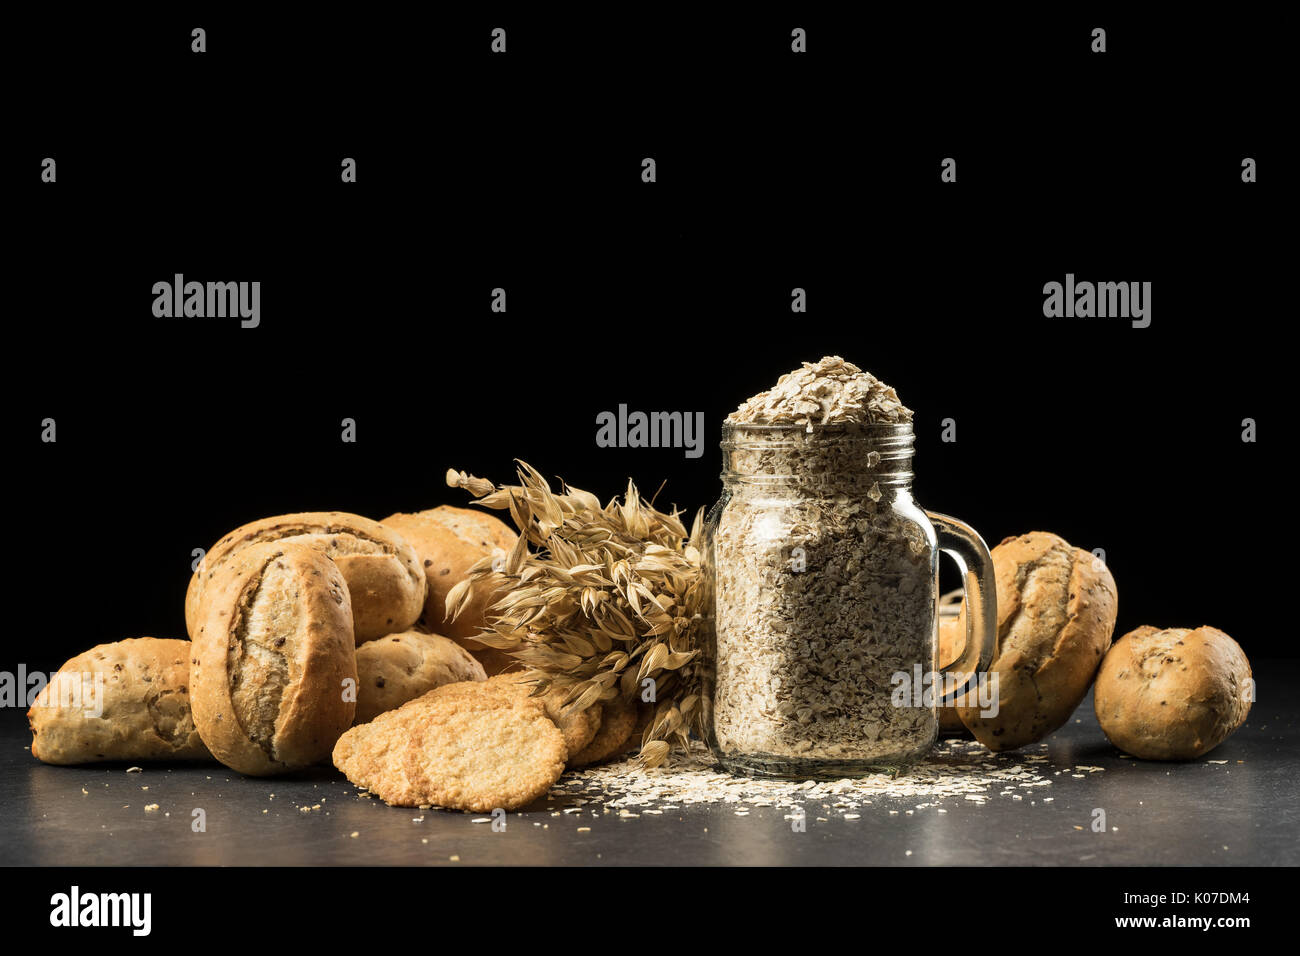 Oat bunch, baked white bread, cookies and flakes in flavouring jar, isolated on black background. Grain bouquet, golden oats spikelets on dark wooden  Stock Photo